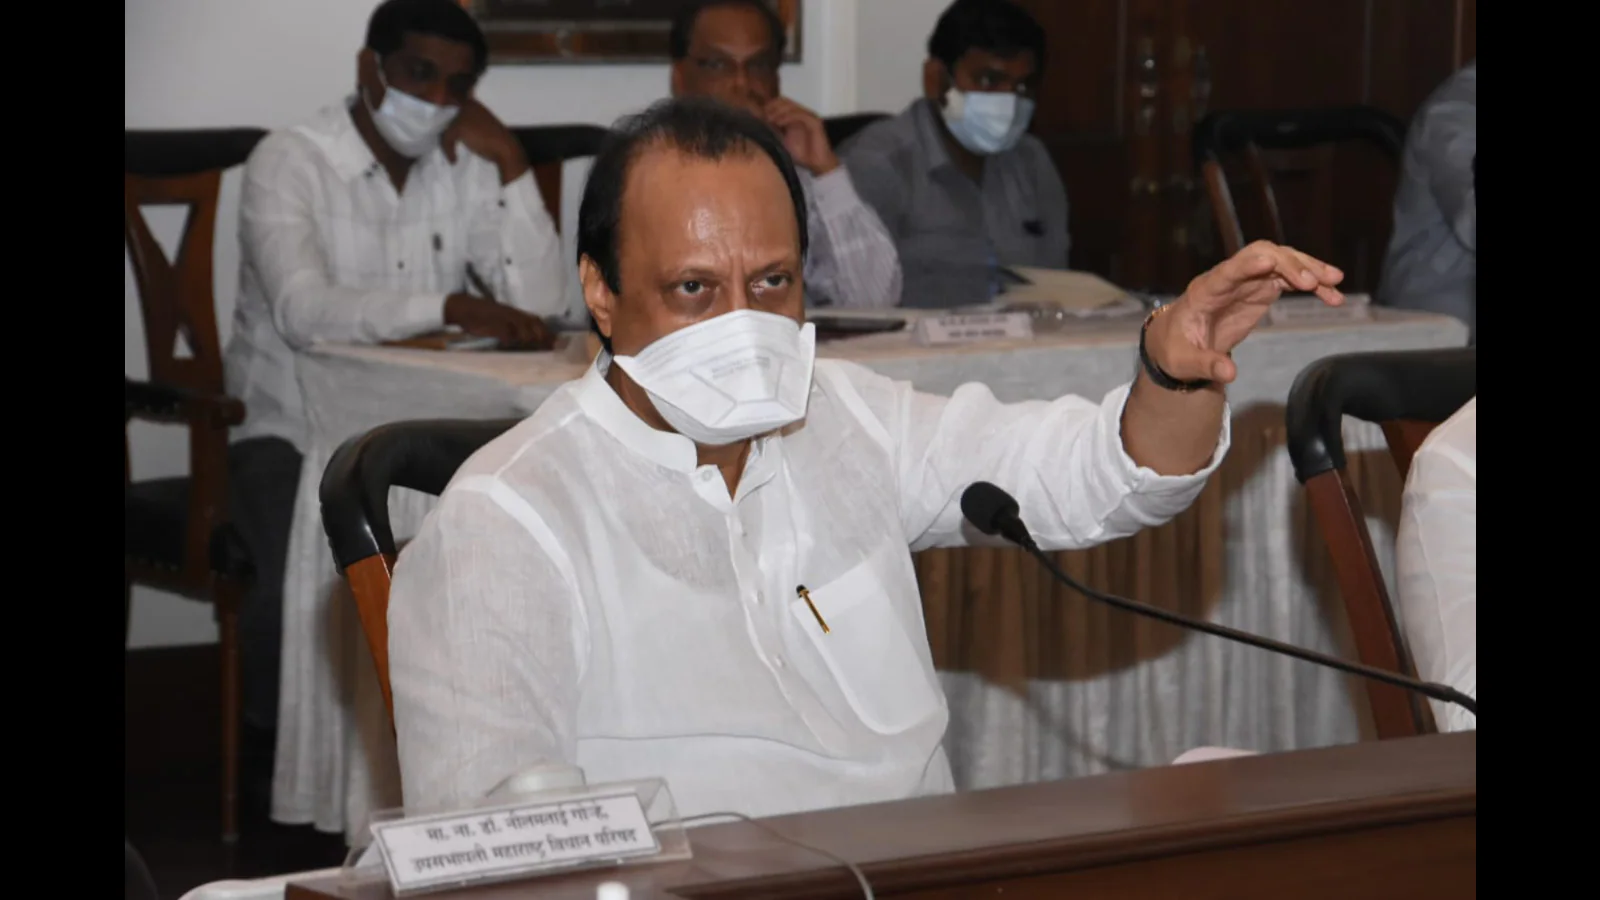 Plan to increase attendance limits at events: Ajit Pawar